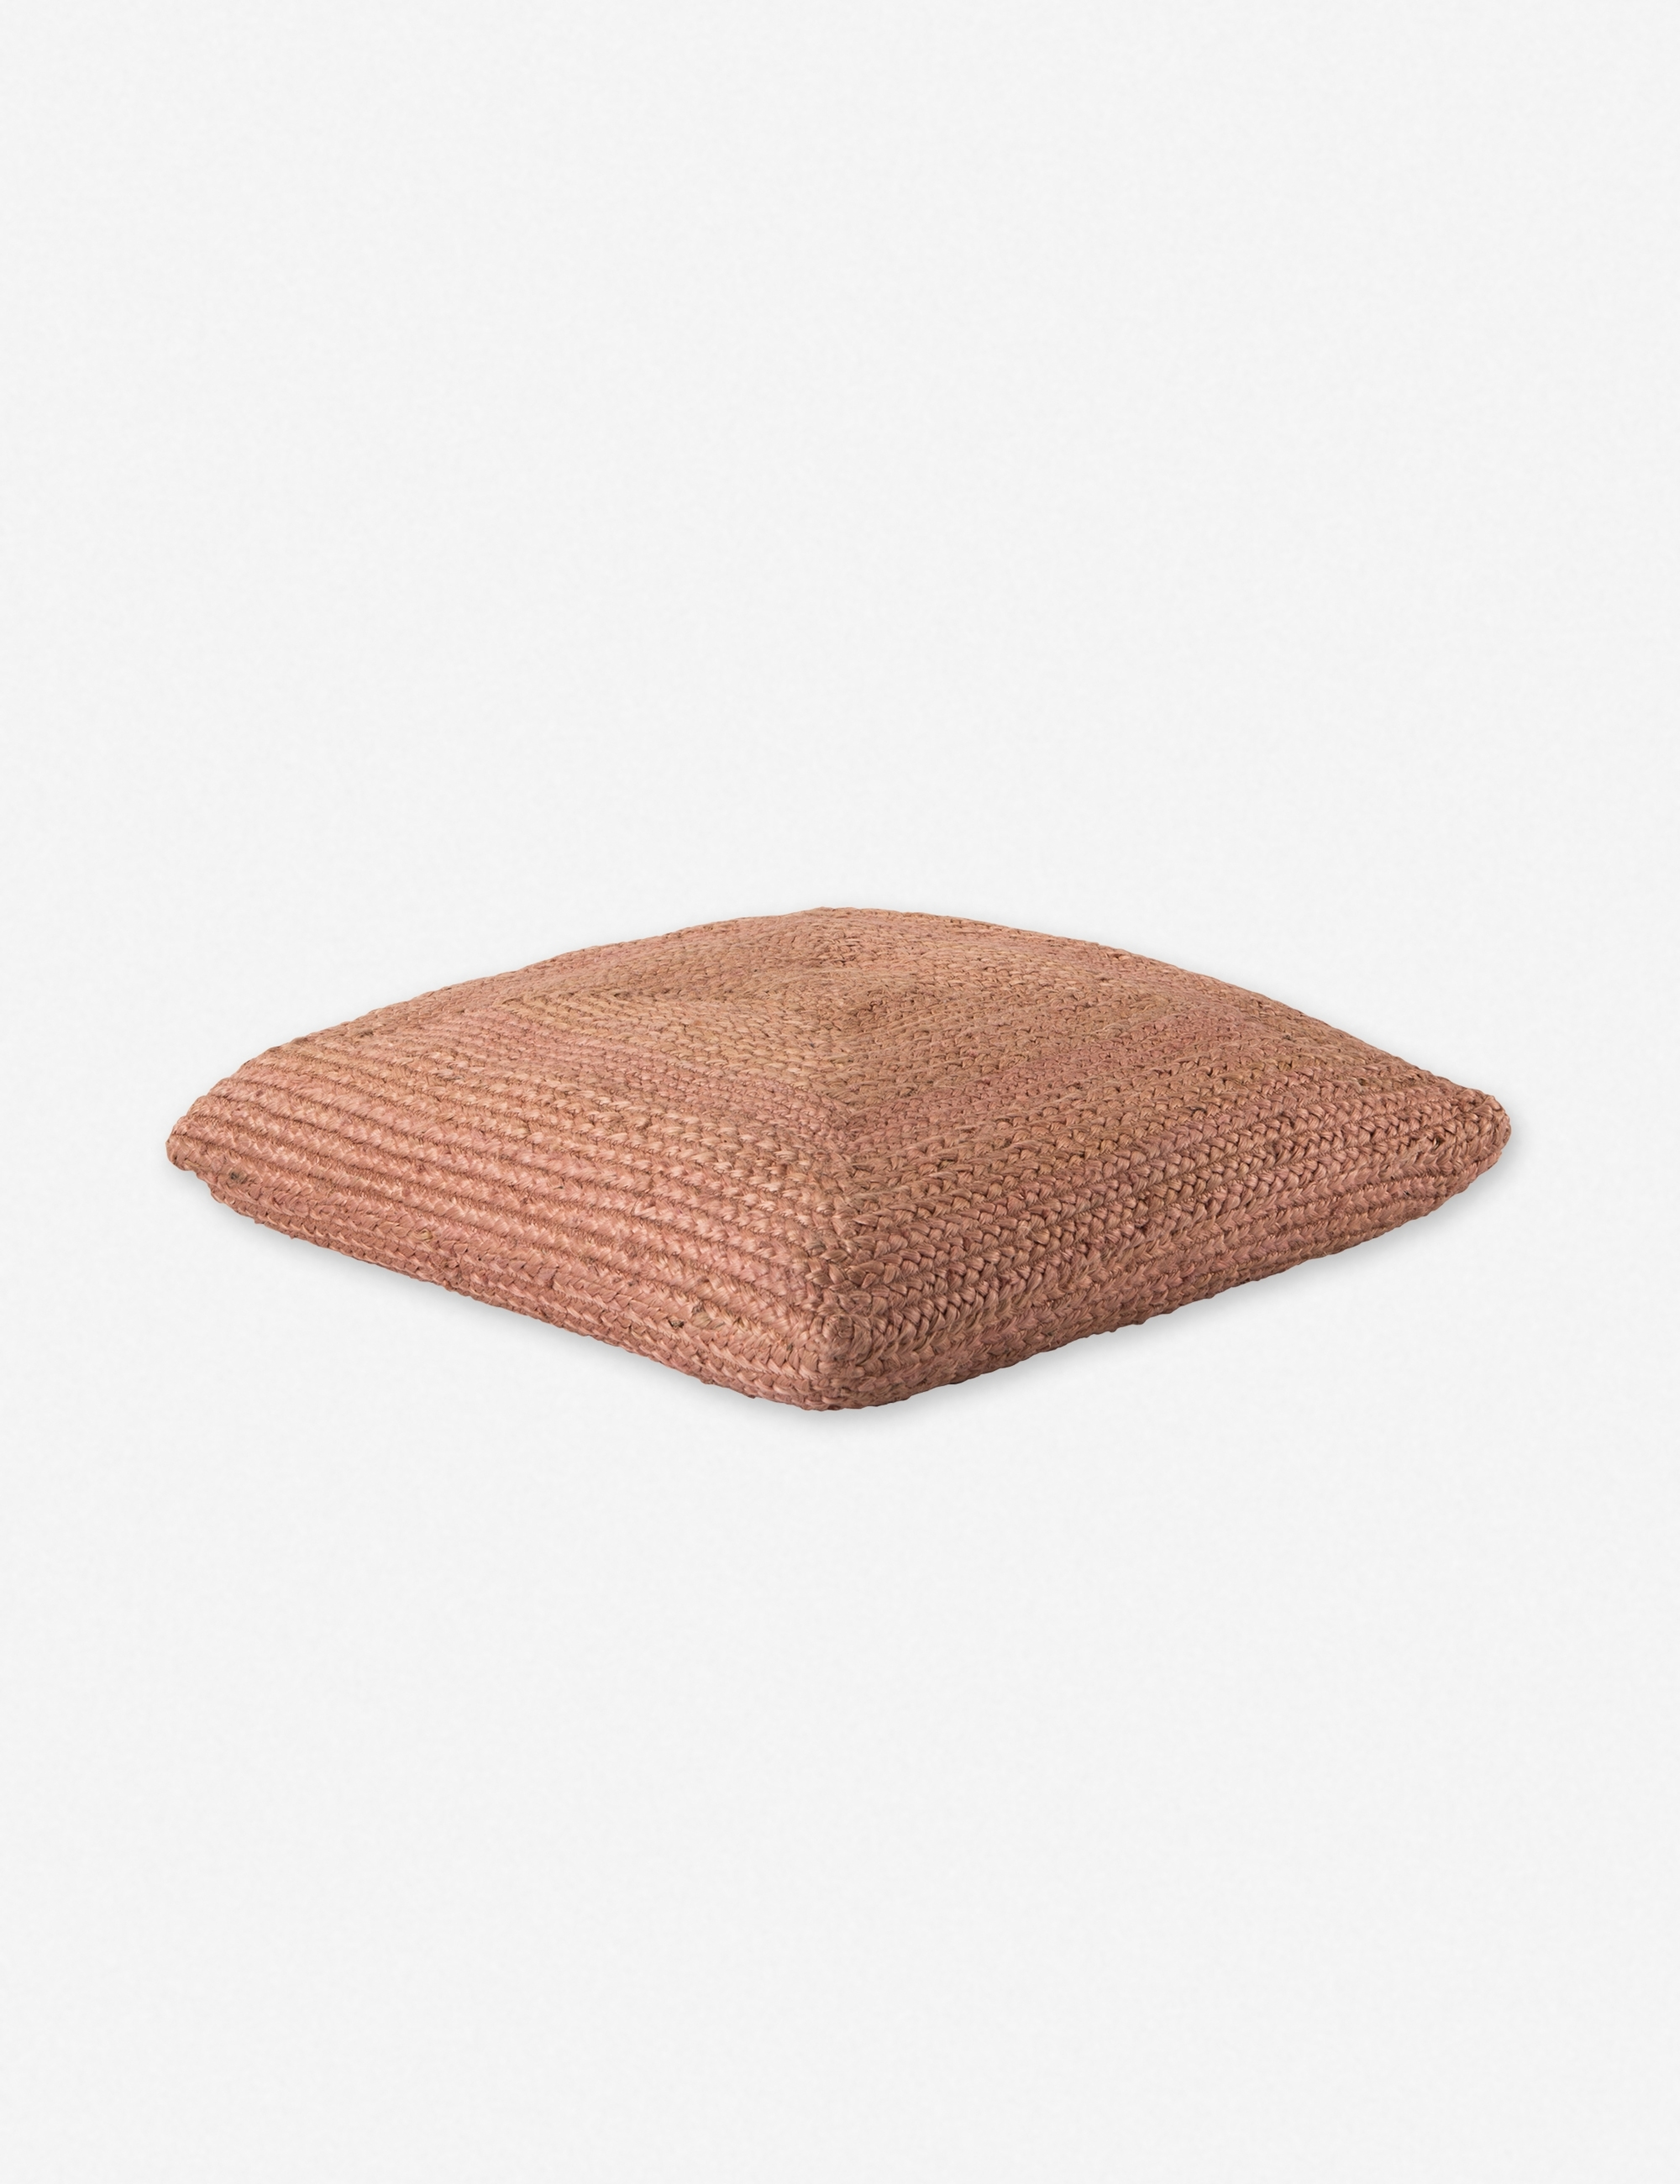 Candess Floor Pillow, Pink - Lulu and Georgia